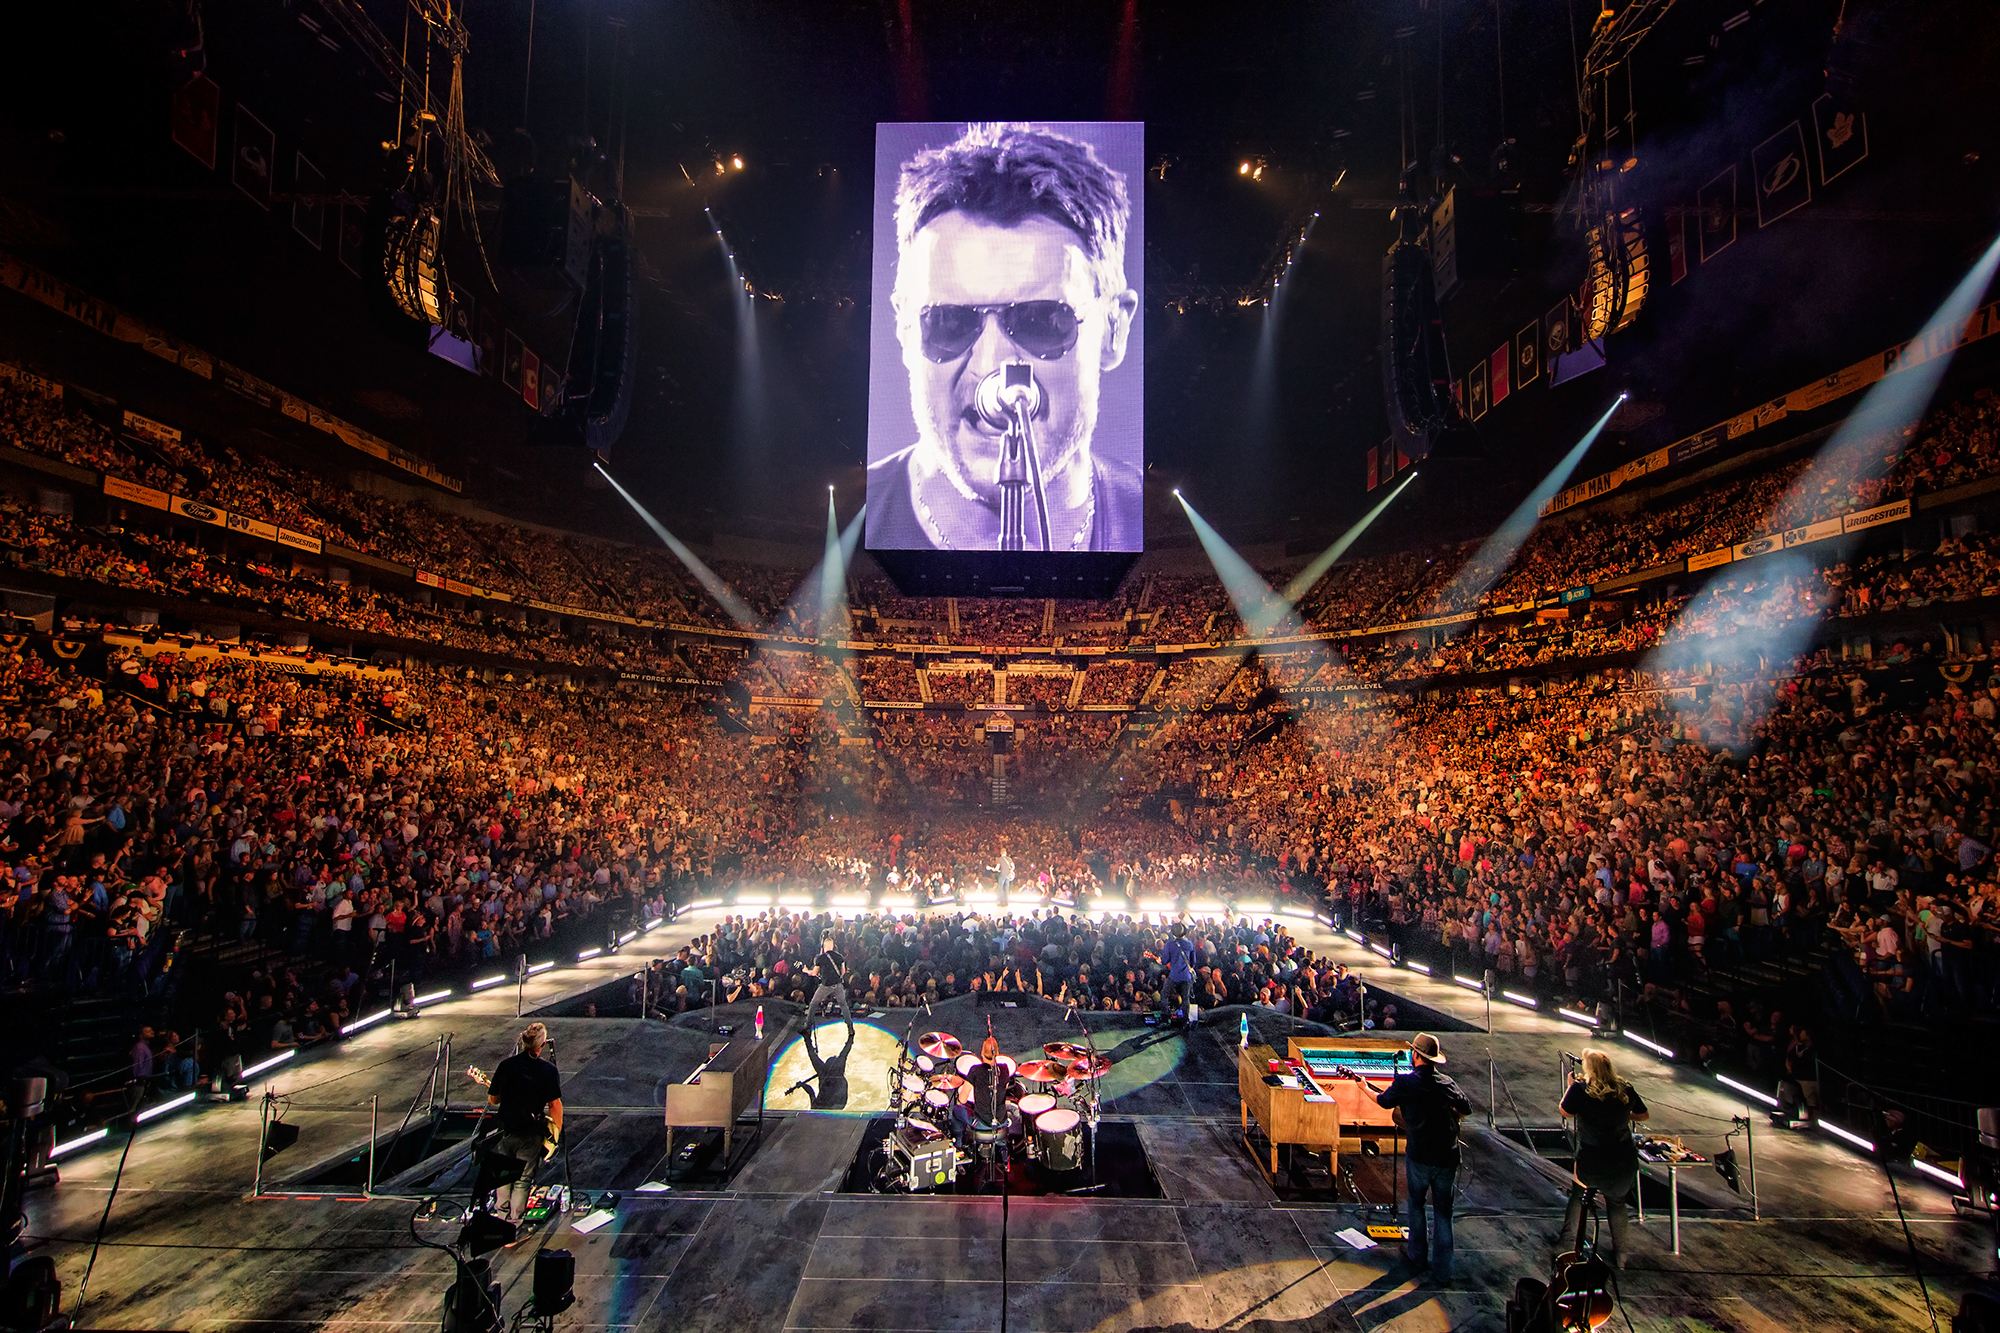 Eric Church Sets Attendance Record at Bridgestone Arena to 18,996 for “Holdin’ My Own” Tour